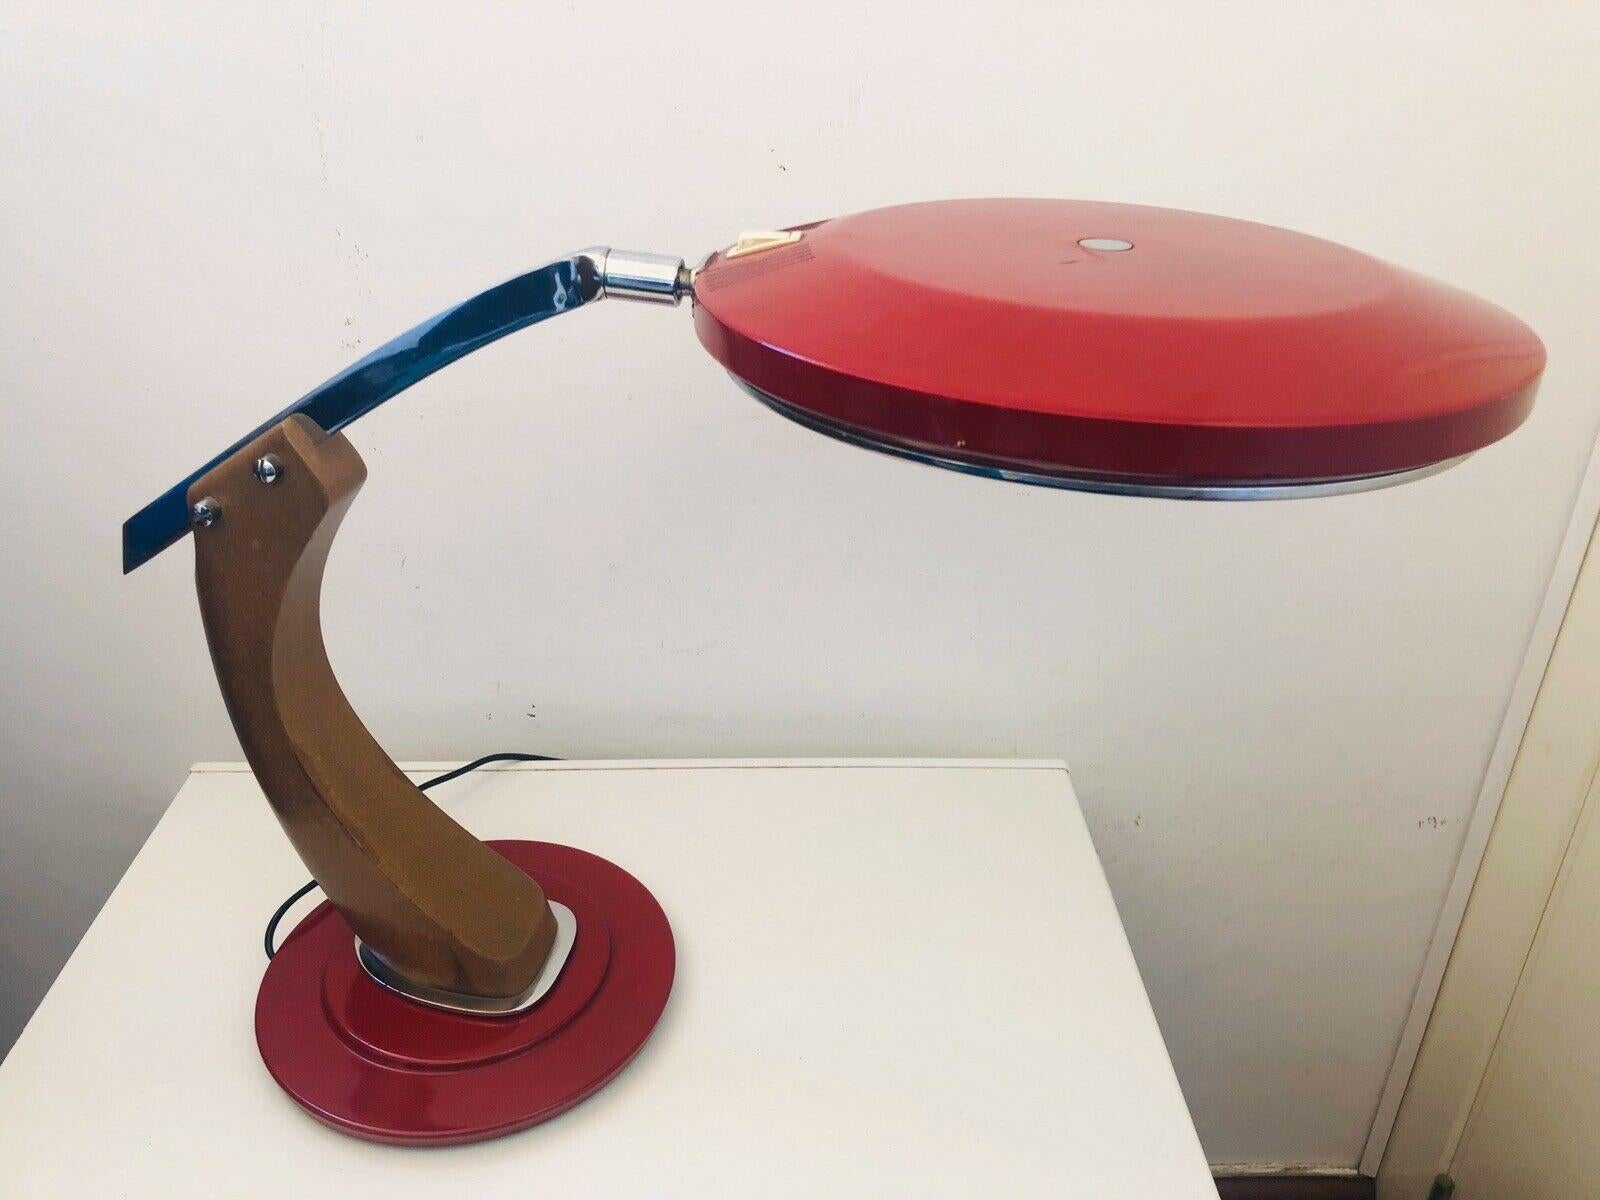 Phase President retro vintage lamp.
Exceptional FASE President model lamp, a model produced from the late 1960s-late 1980s), a desk lamp made from noble materials: oak wood, glass, lacquered and chrome metal and a completely timeless design, as